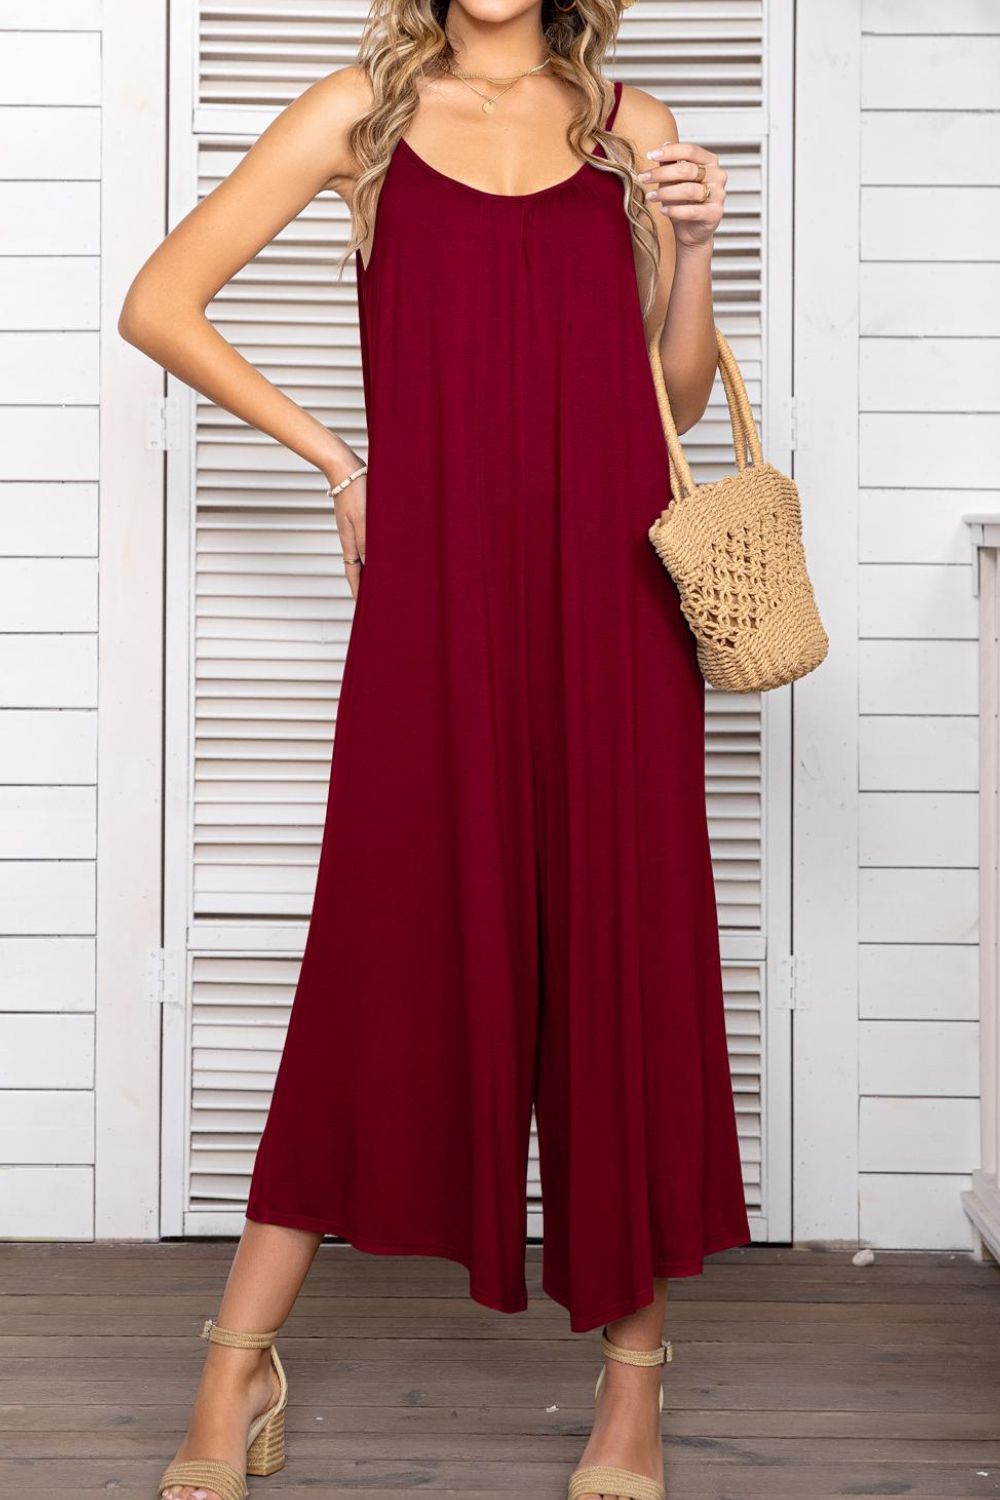 Spaghetti Strap Scoop Neck Jumpsuit In Deep Red